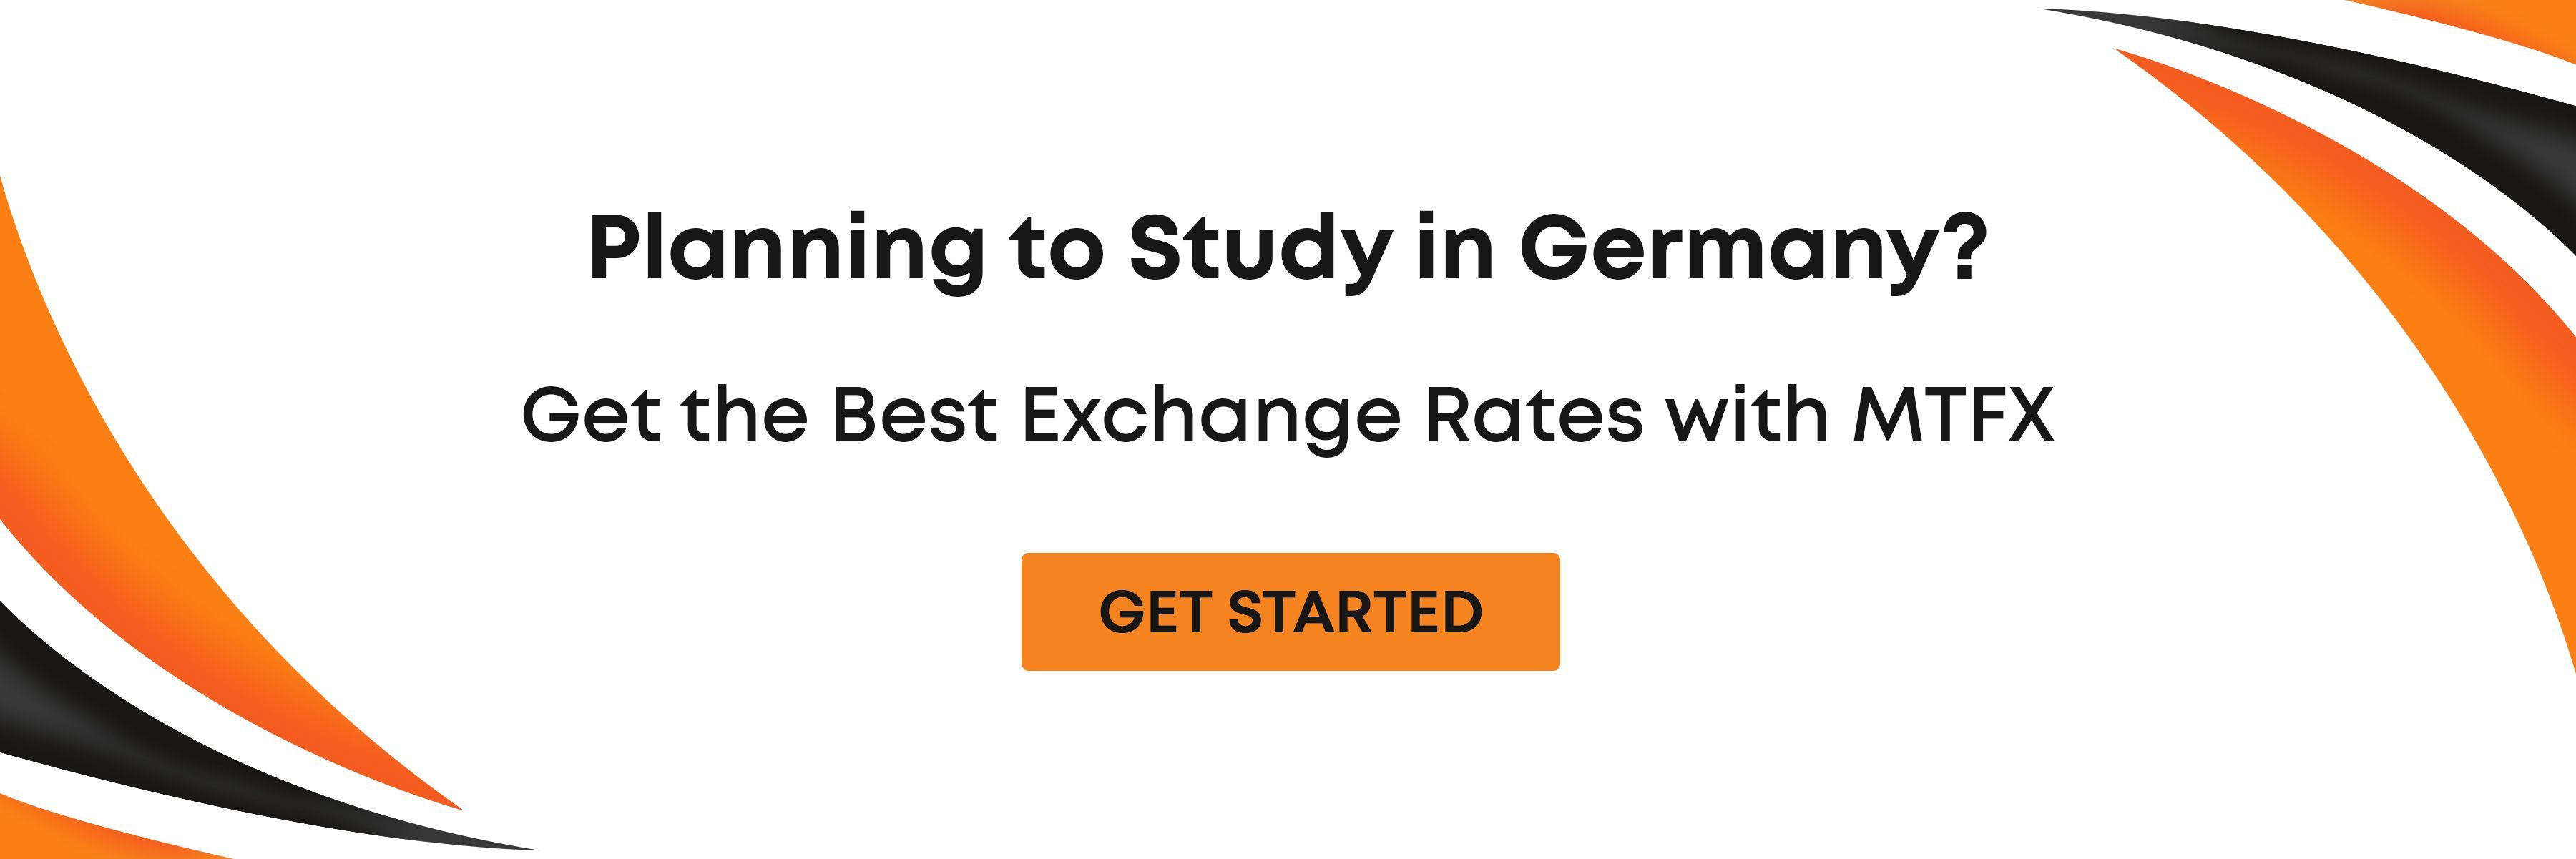 Planning to study in Germany?